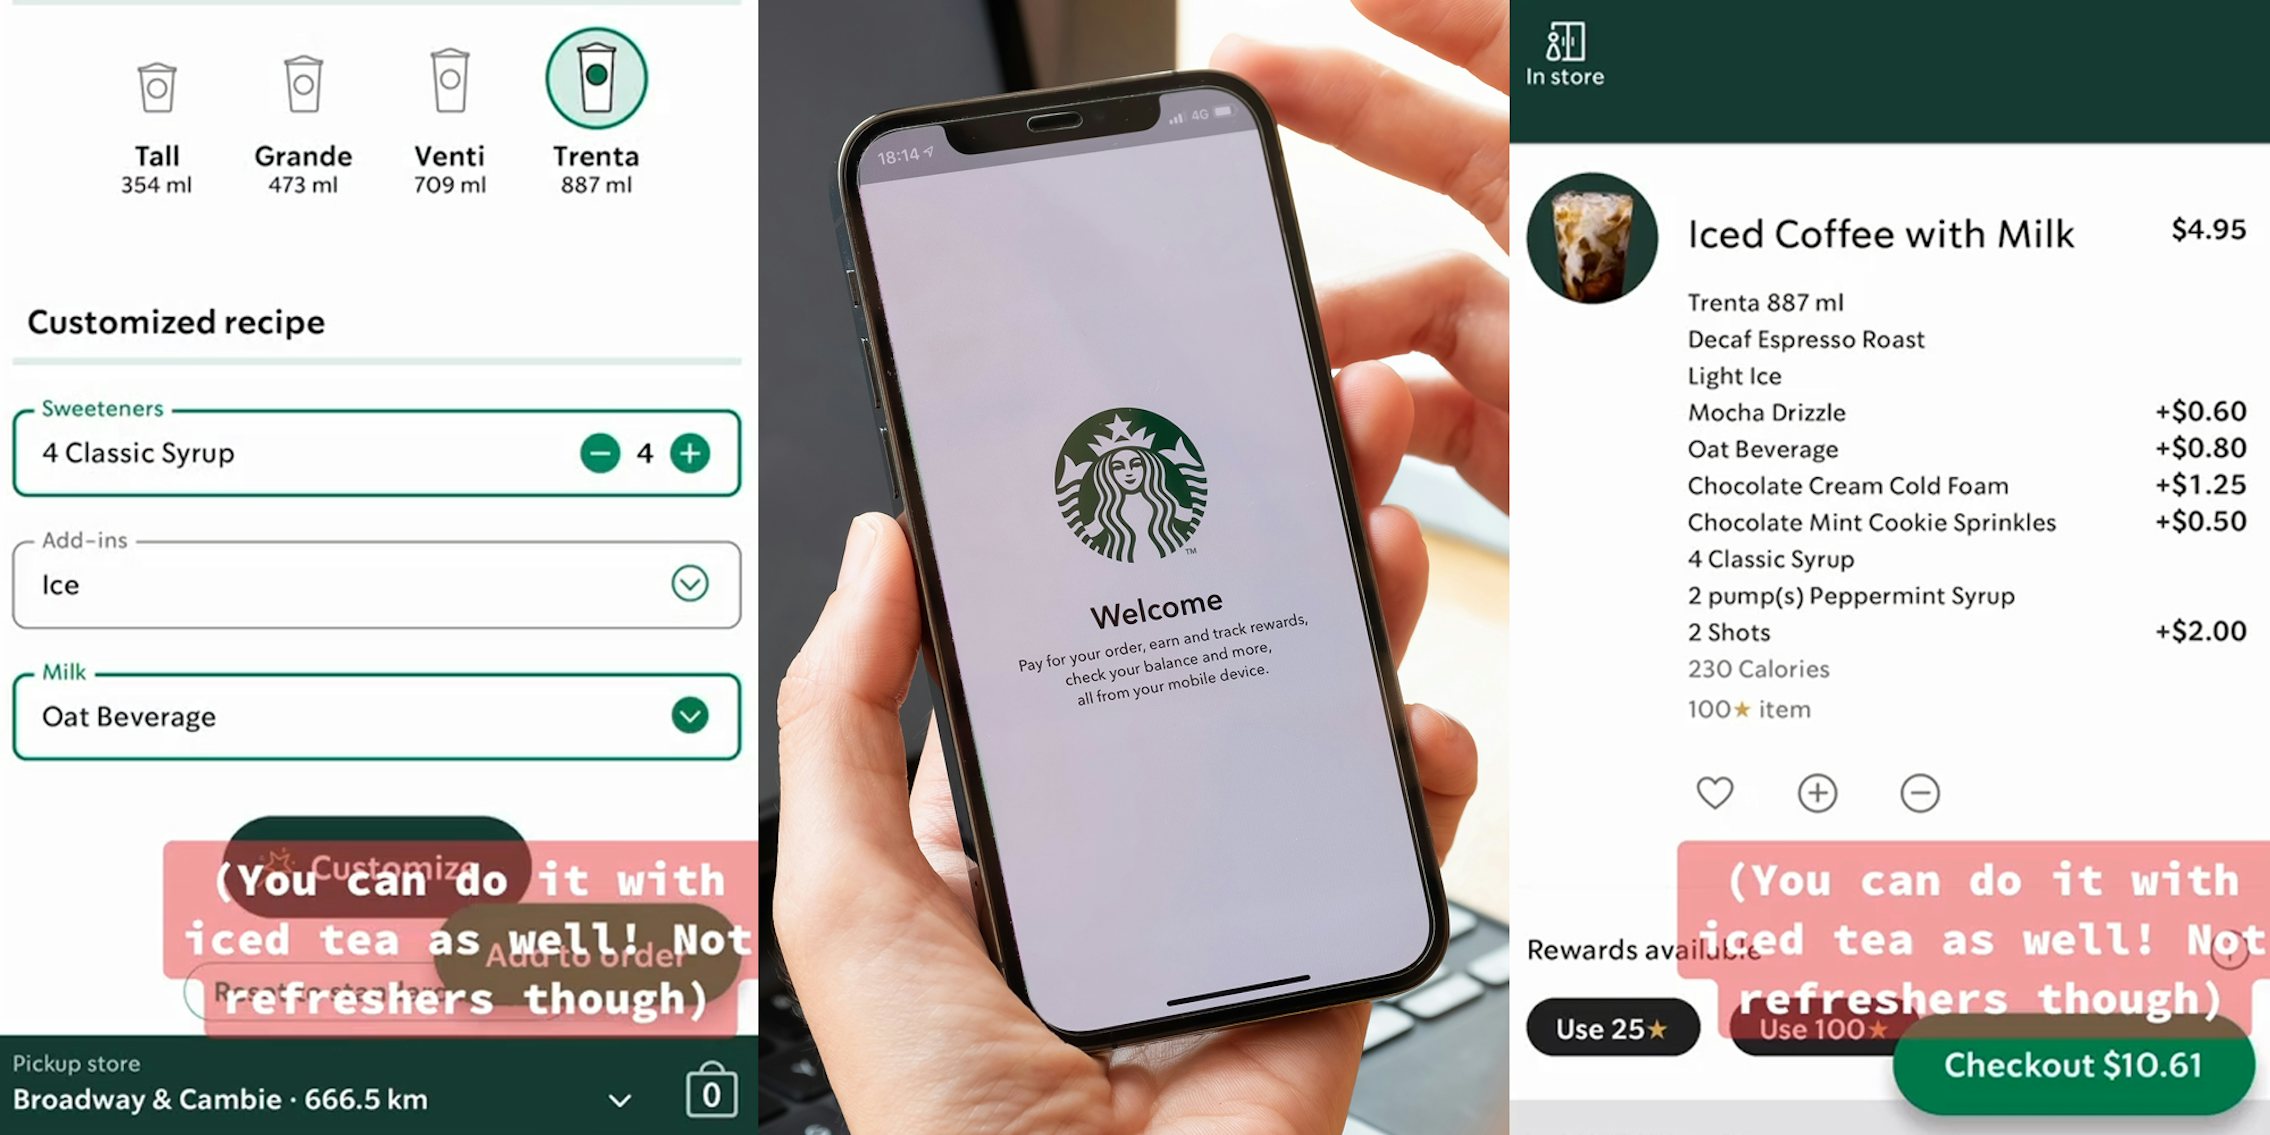 Starbucks app ordering screen with caption '(You can do it with iced tea as well! Not refreshers though)' (l) hand holding phone with Starbucks app open on screen (c) Starbucks app ordering screen with caption '(You can do it with iced tea as well! Not refreshers though)' (r)